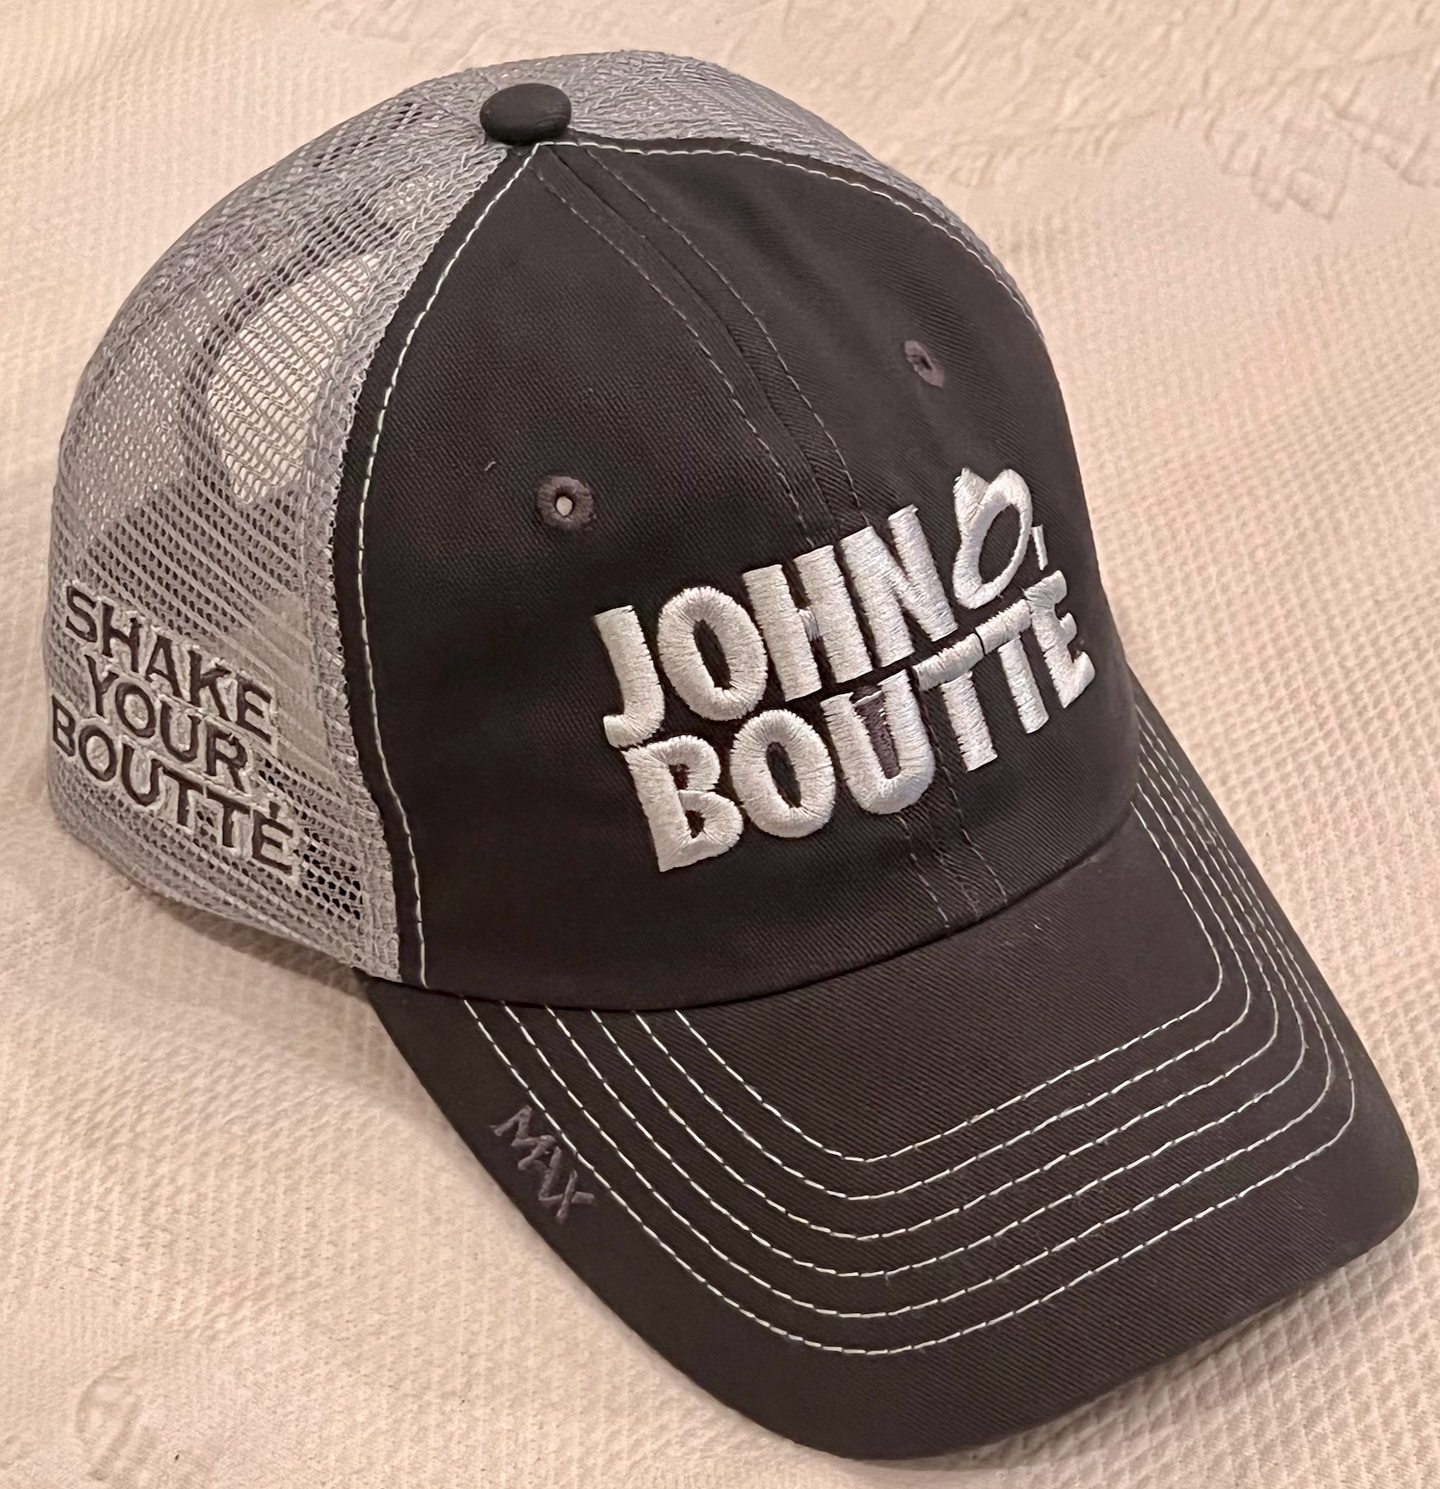 NEW first ever John Boutte´ hats are HERE y'all! Order today!